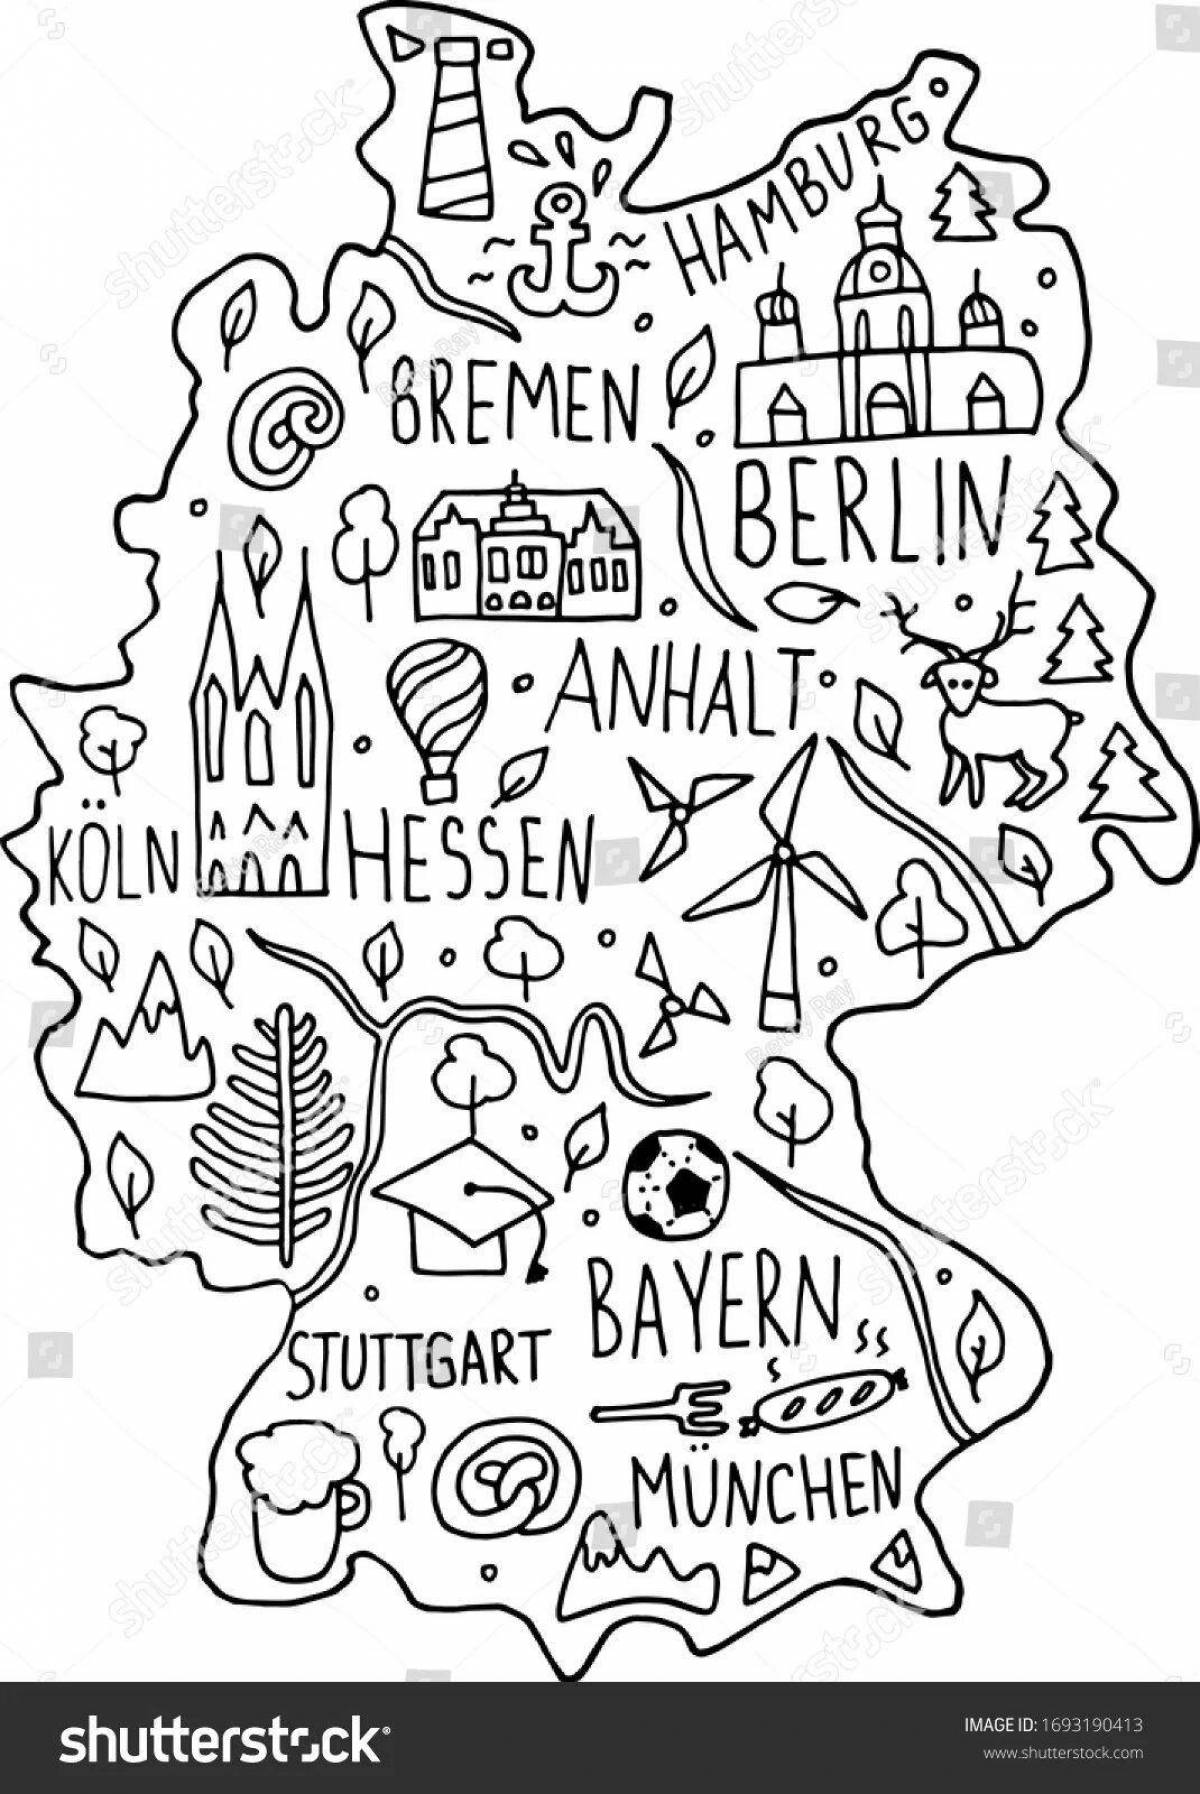 Playful germany map coloring page